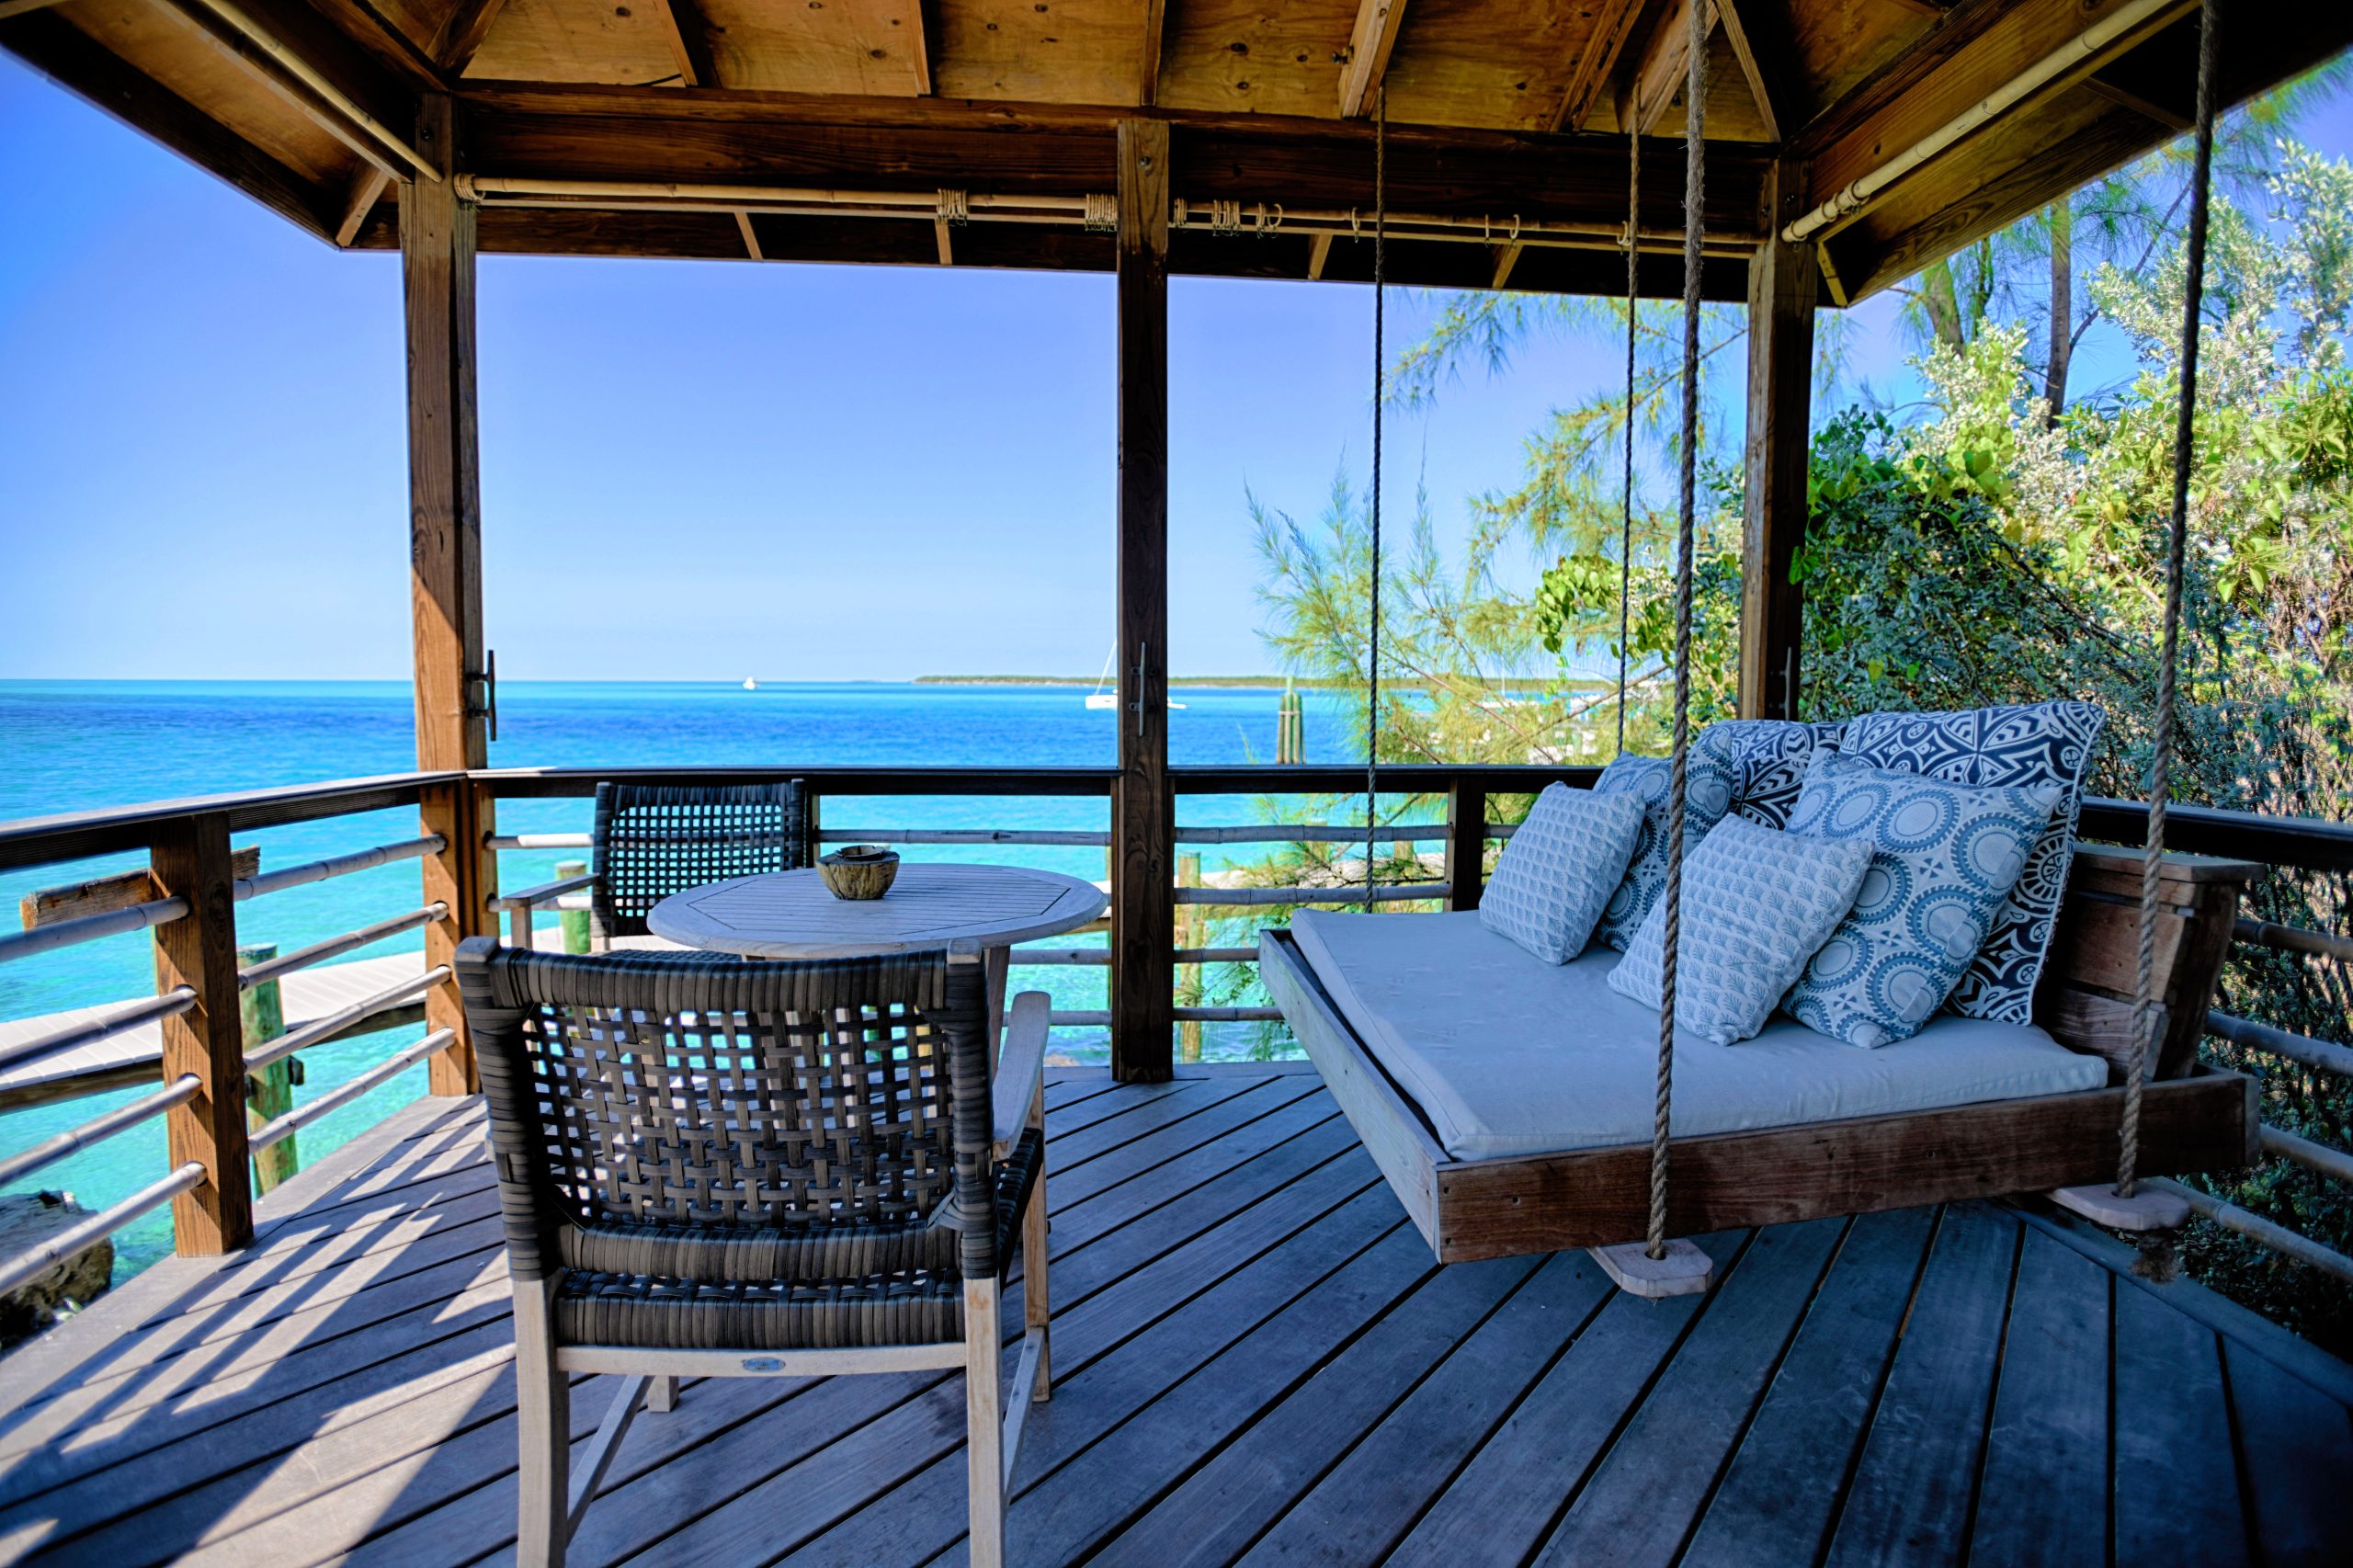 A porch with a swing and a view of the ocean at Staniel Cay.